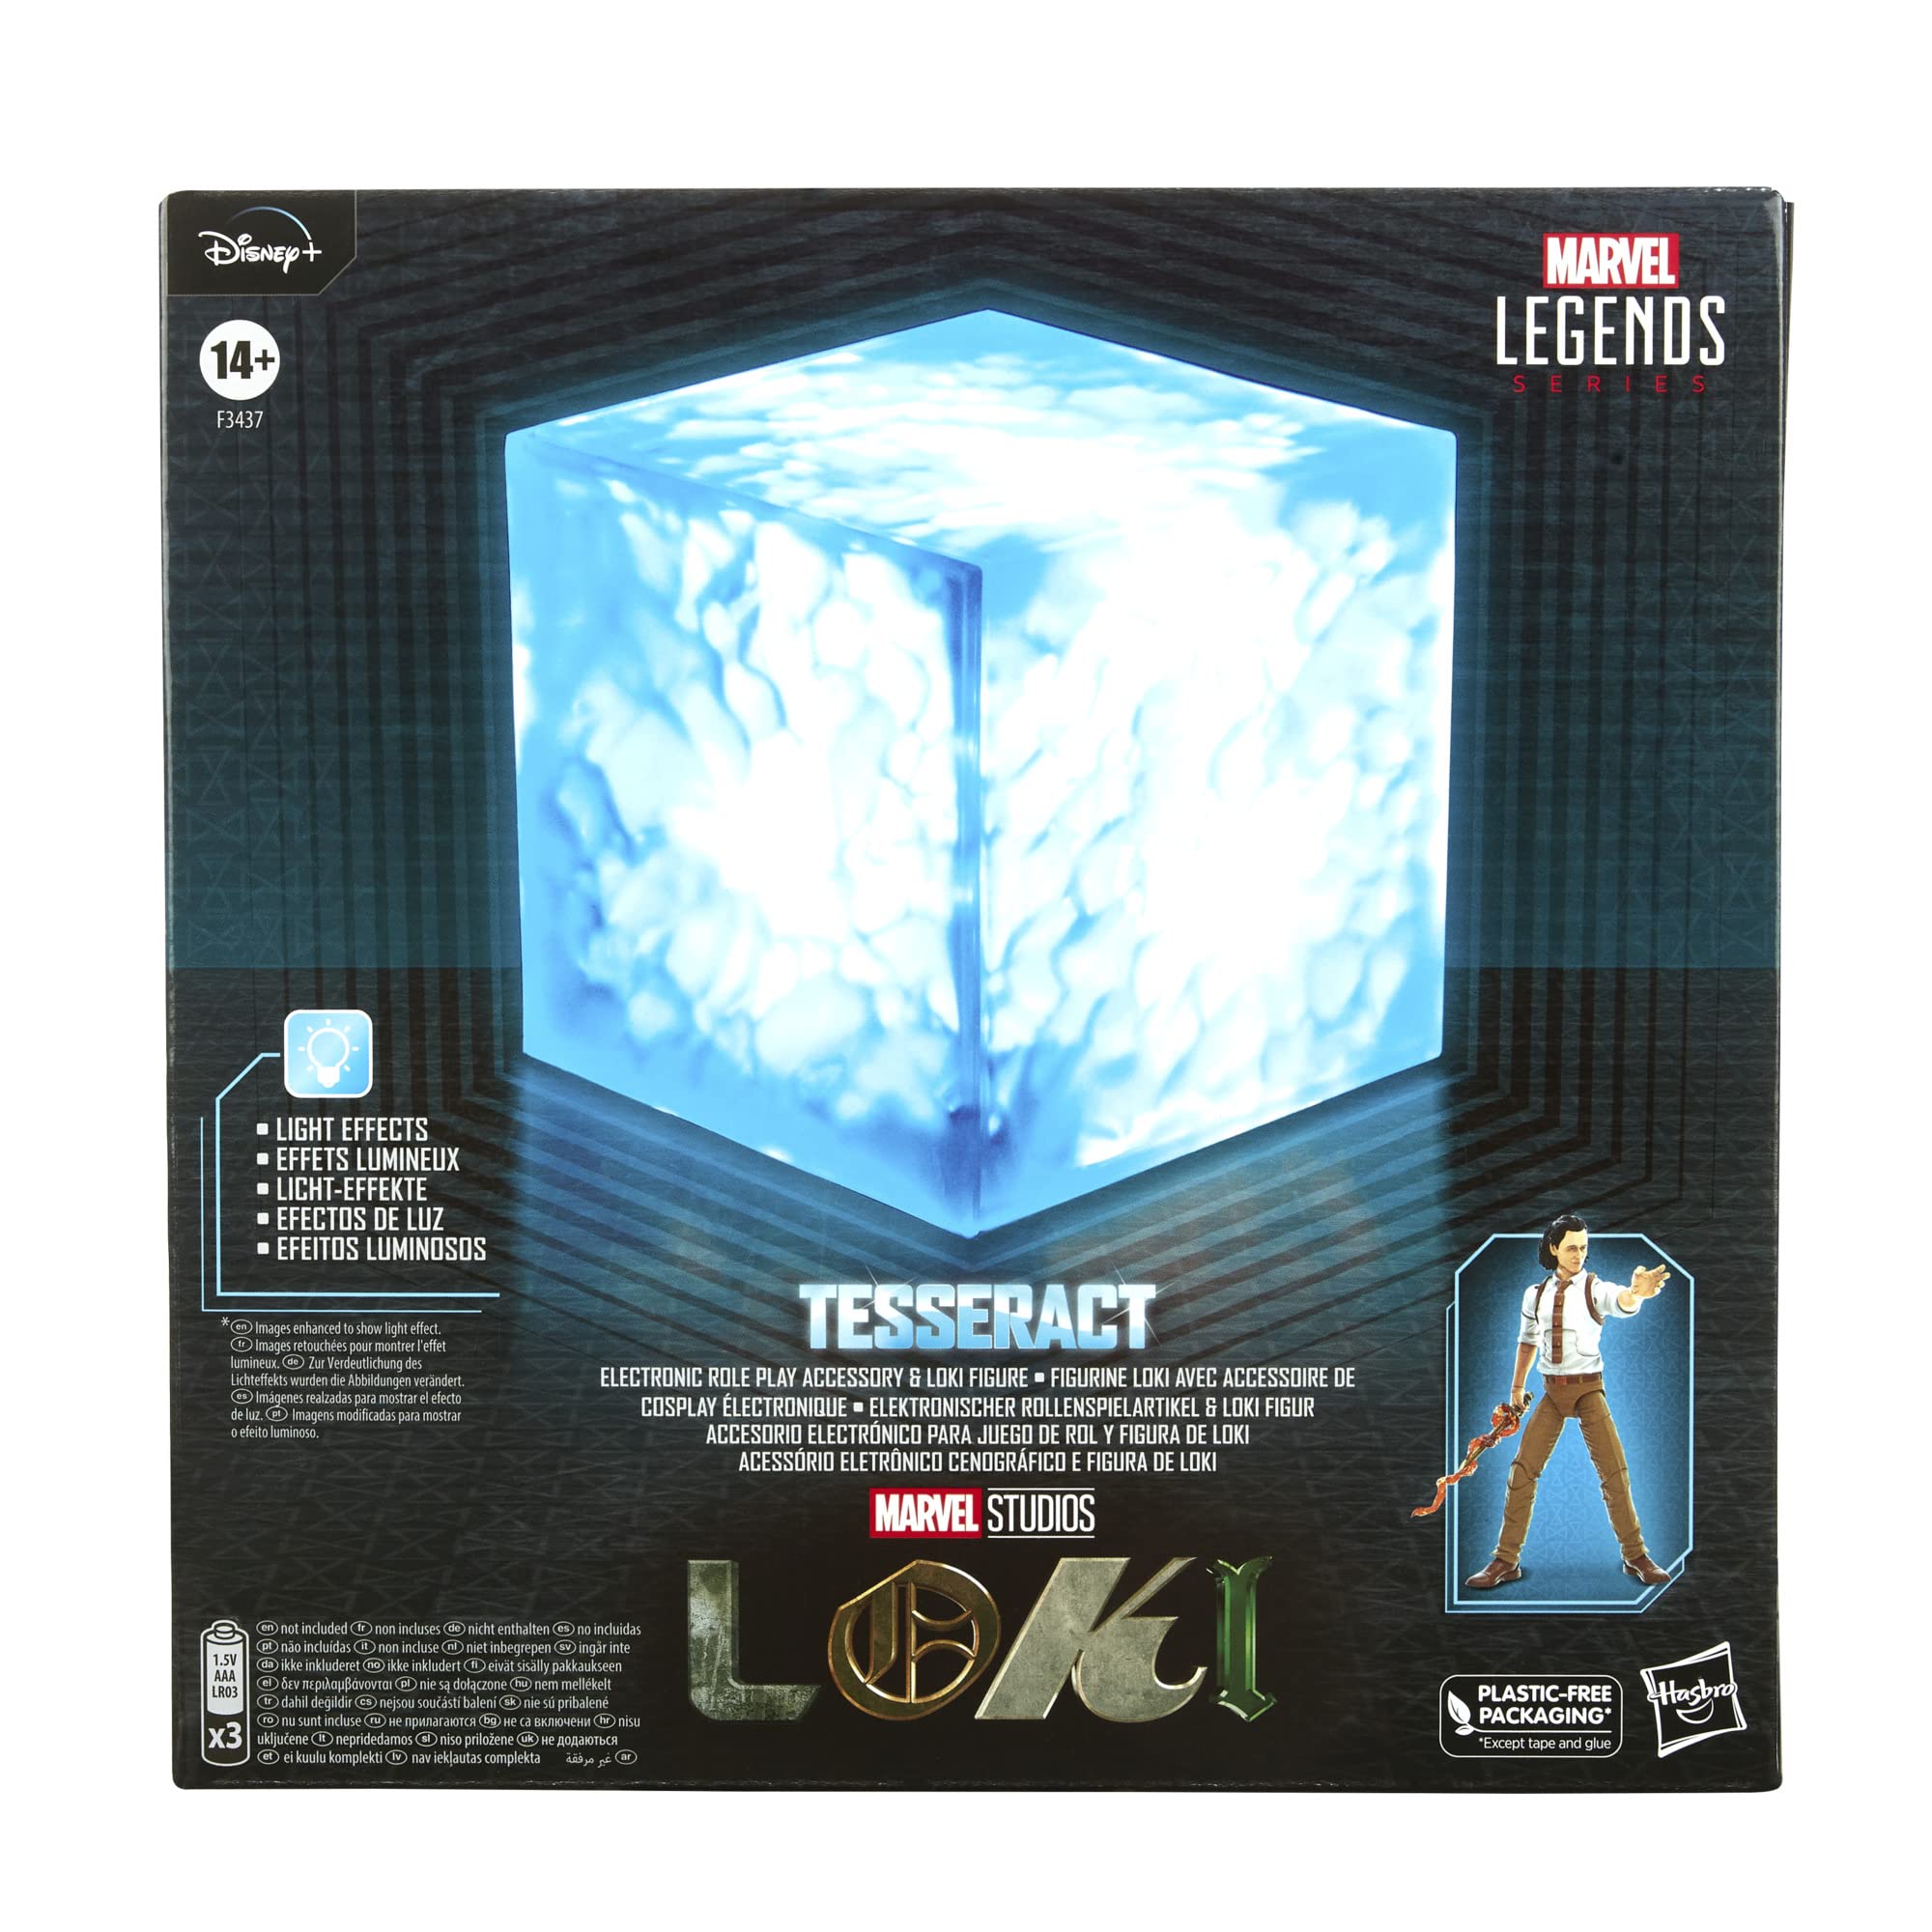 Avengers Marvel Legends Series Tesseract Electronic Role Play Accessory with Light FX, Marvel Studios Roleplay Item and 6 Collec